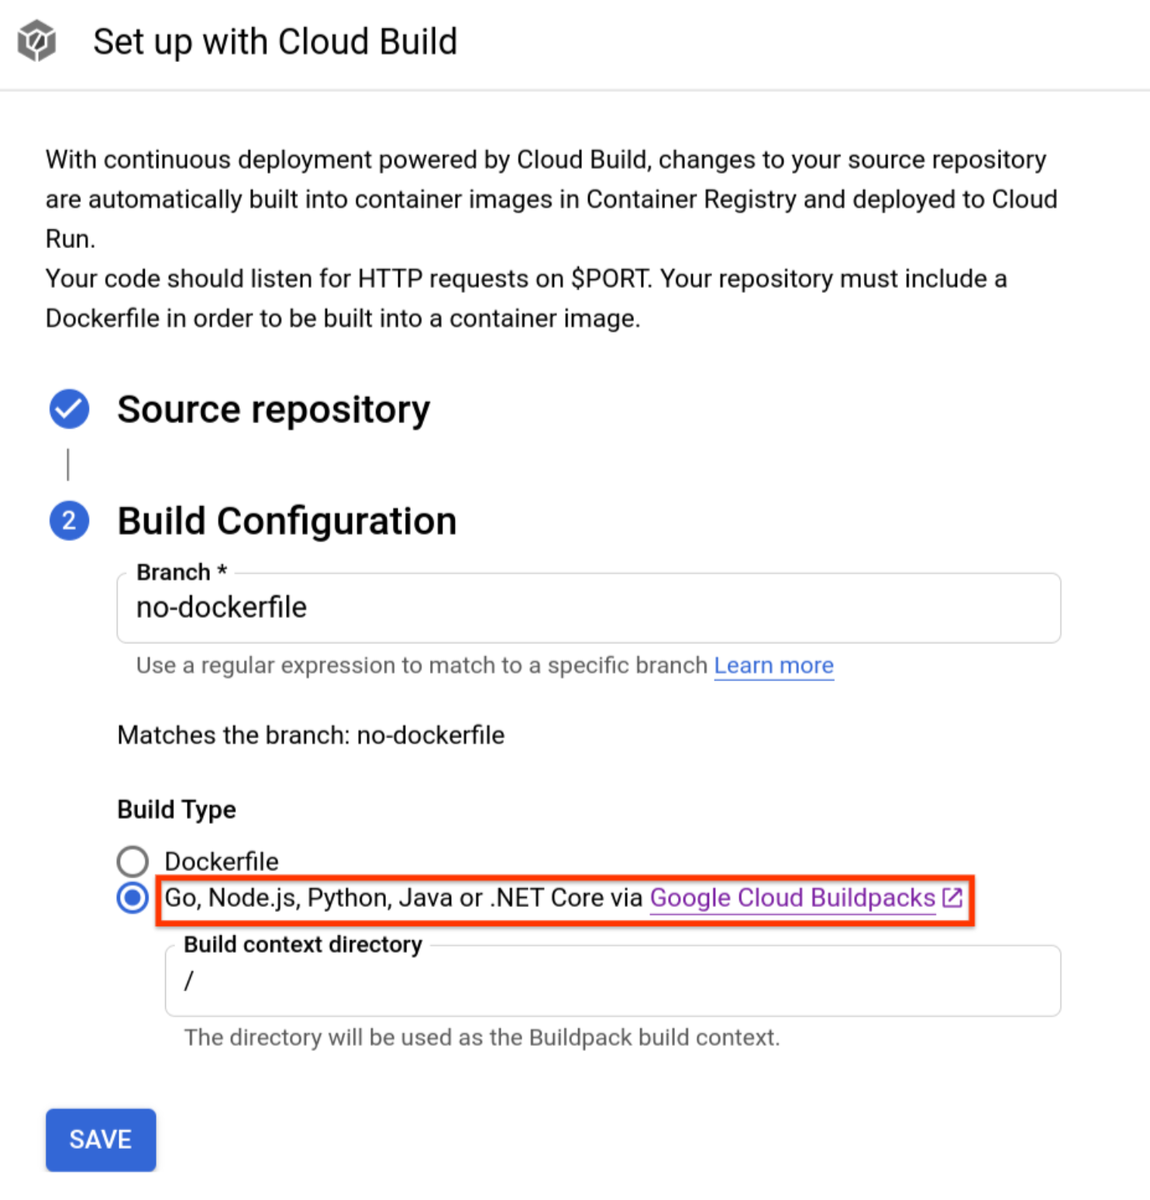  When setting up Continuous Deployment from the Cloud Run user interface, you can now select a repository that contains Go, Node.js, Python Java or .NET Core code. It will be built using Google Cloud Buildpacks without needing a Dockerfile ( https://github.com/GoogleCloudPlatform/buildpacks)